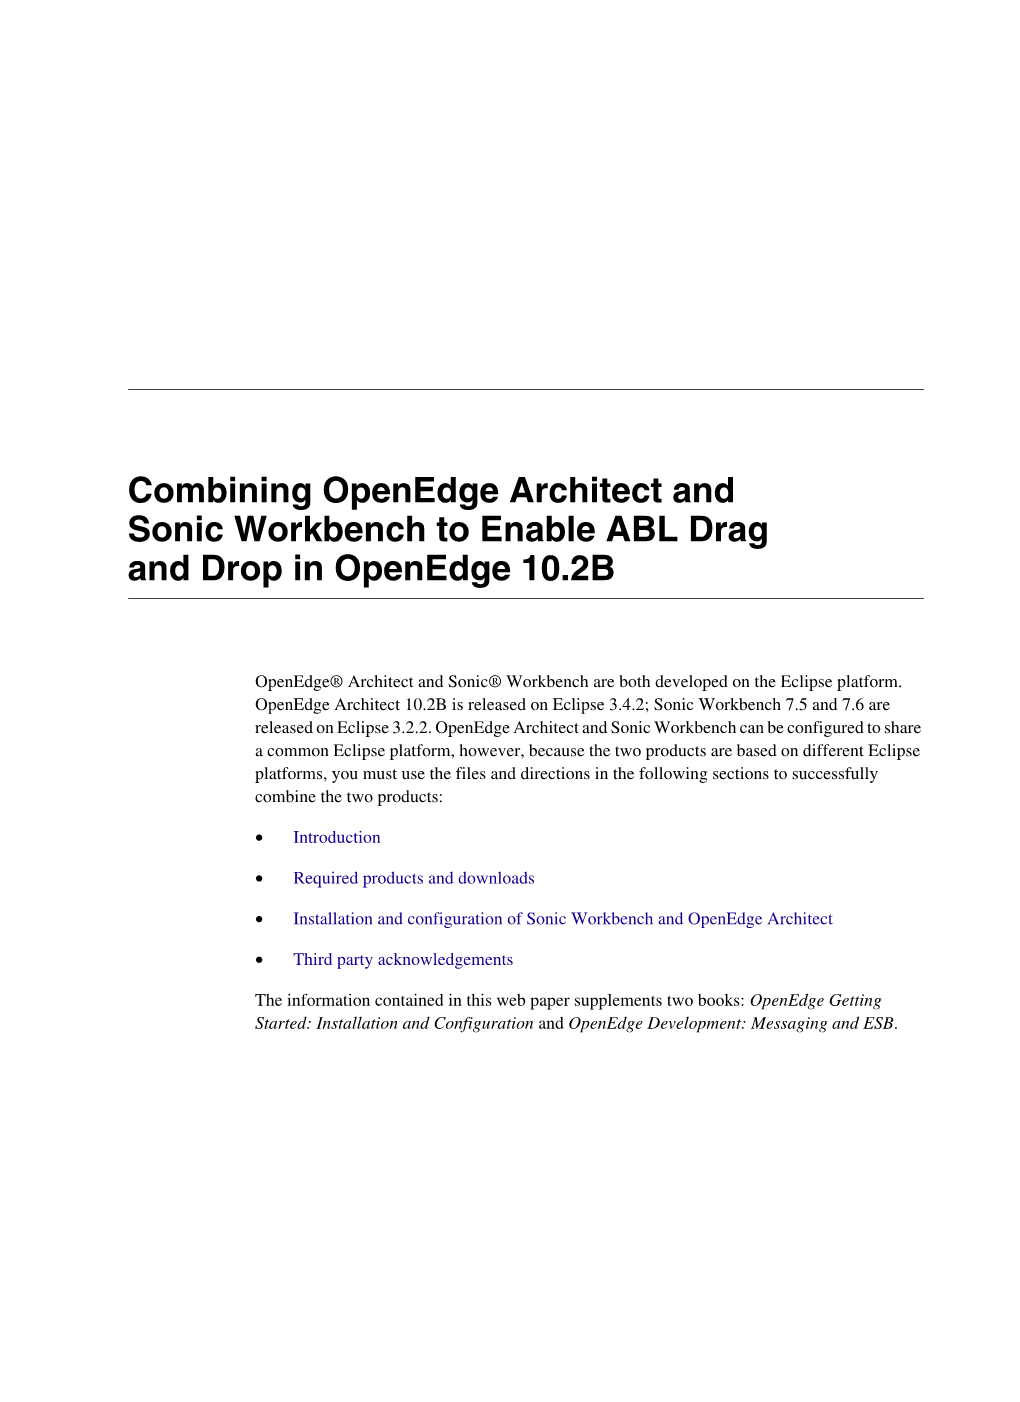 Installation and Configuration of Sonic Workbench and Openedge Architect